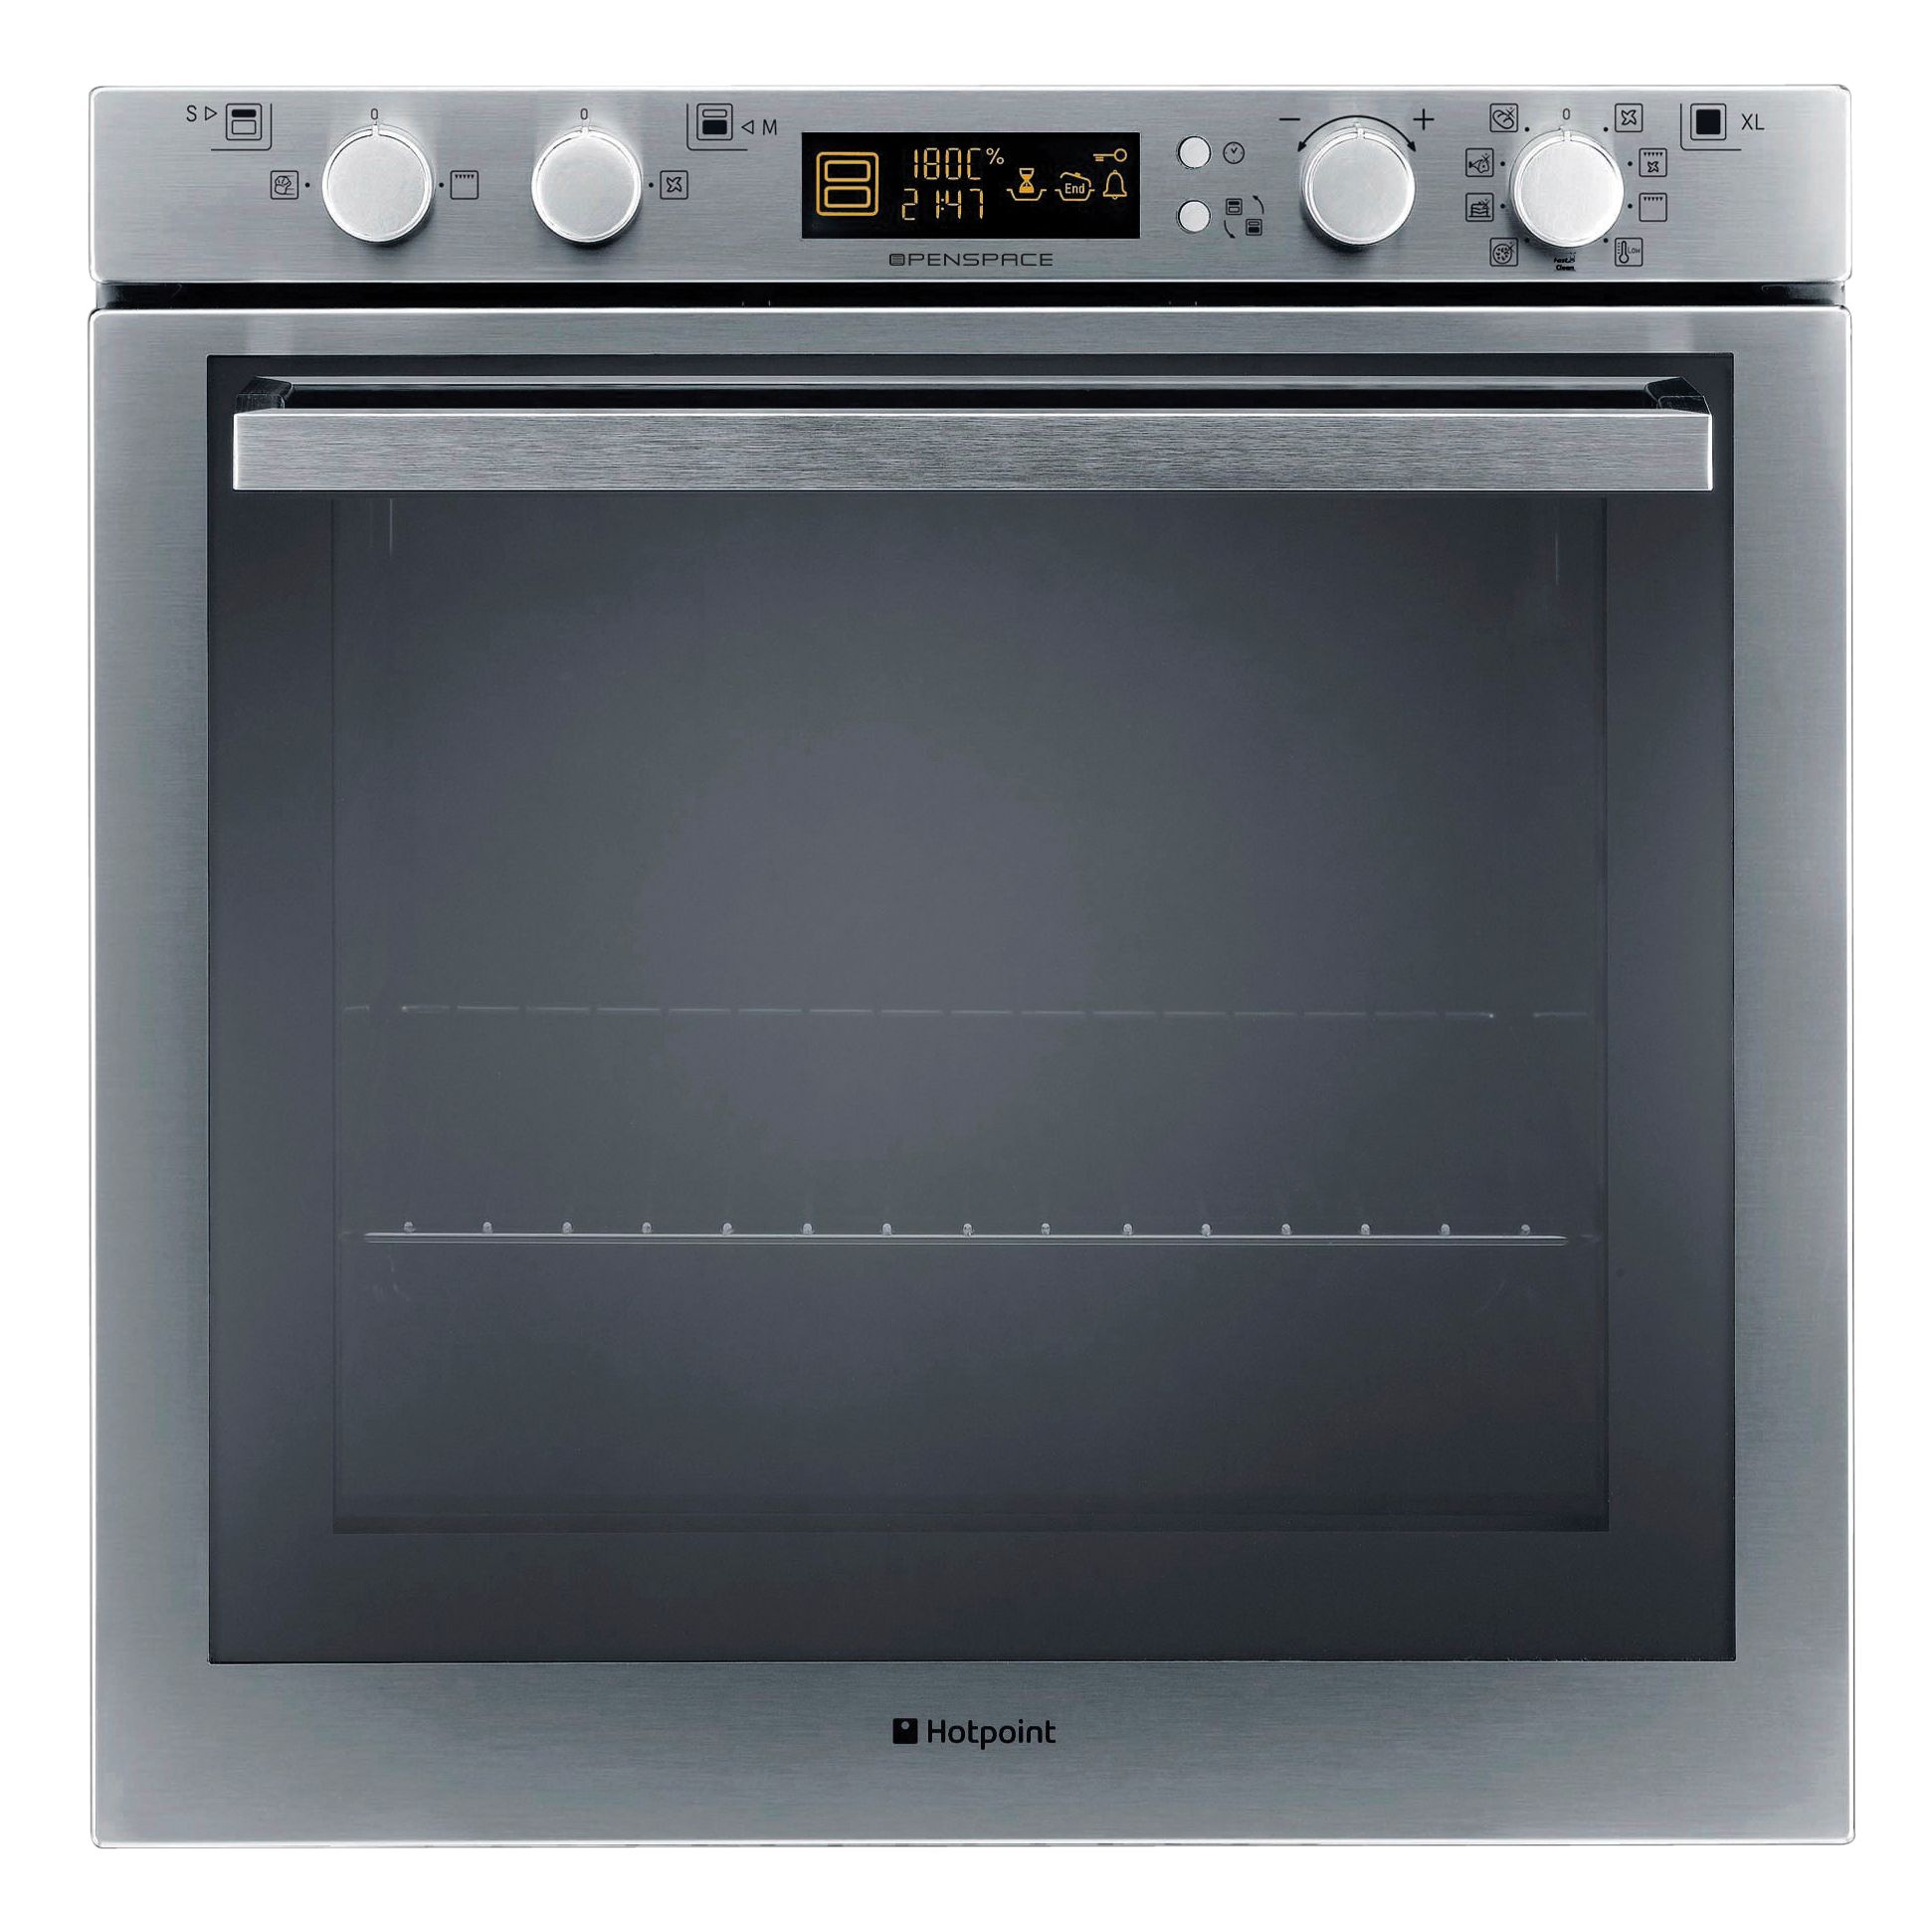 Hotpoint OS897DPIX Single Electric Oven, Stainless Steel at John Lewis